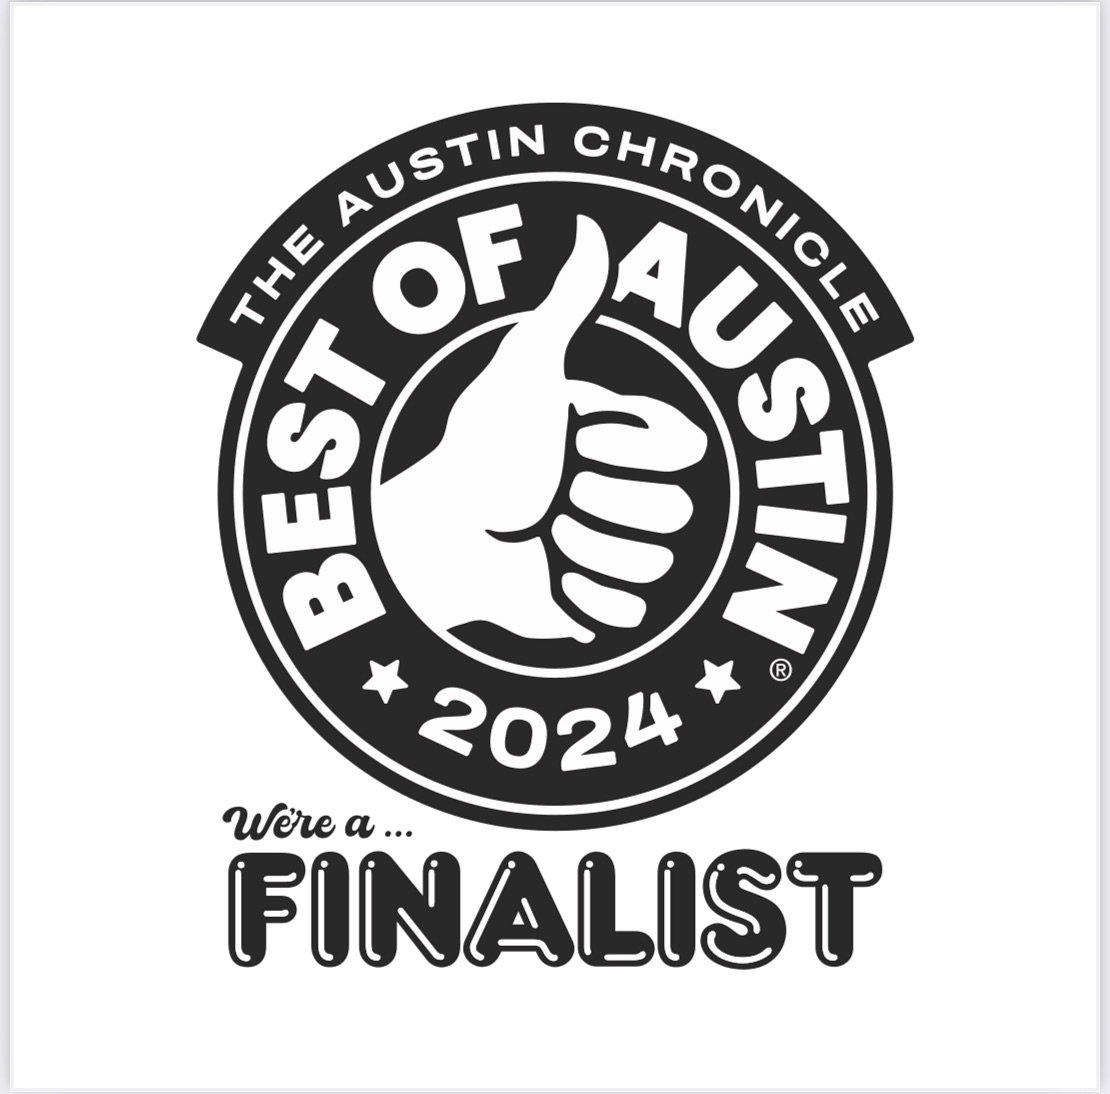 We&rsquo;re a finalist! Thanks so much for nominating us - now help us get to the finish line! 🎉 Voting ends May 20th - the direct link is in our bio 💕 #bestofaustin #floresmarketatx